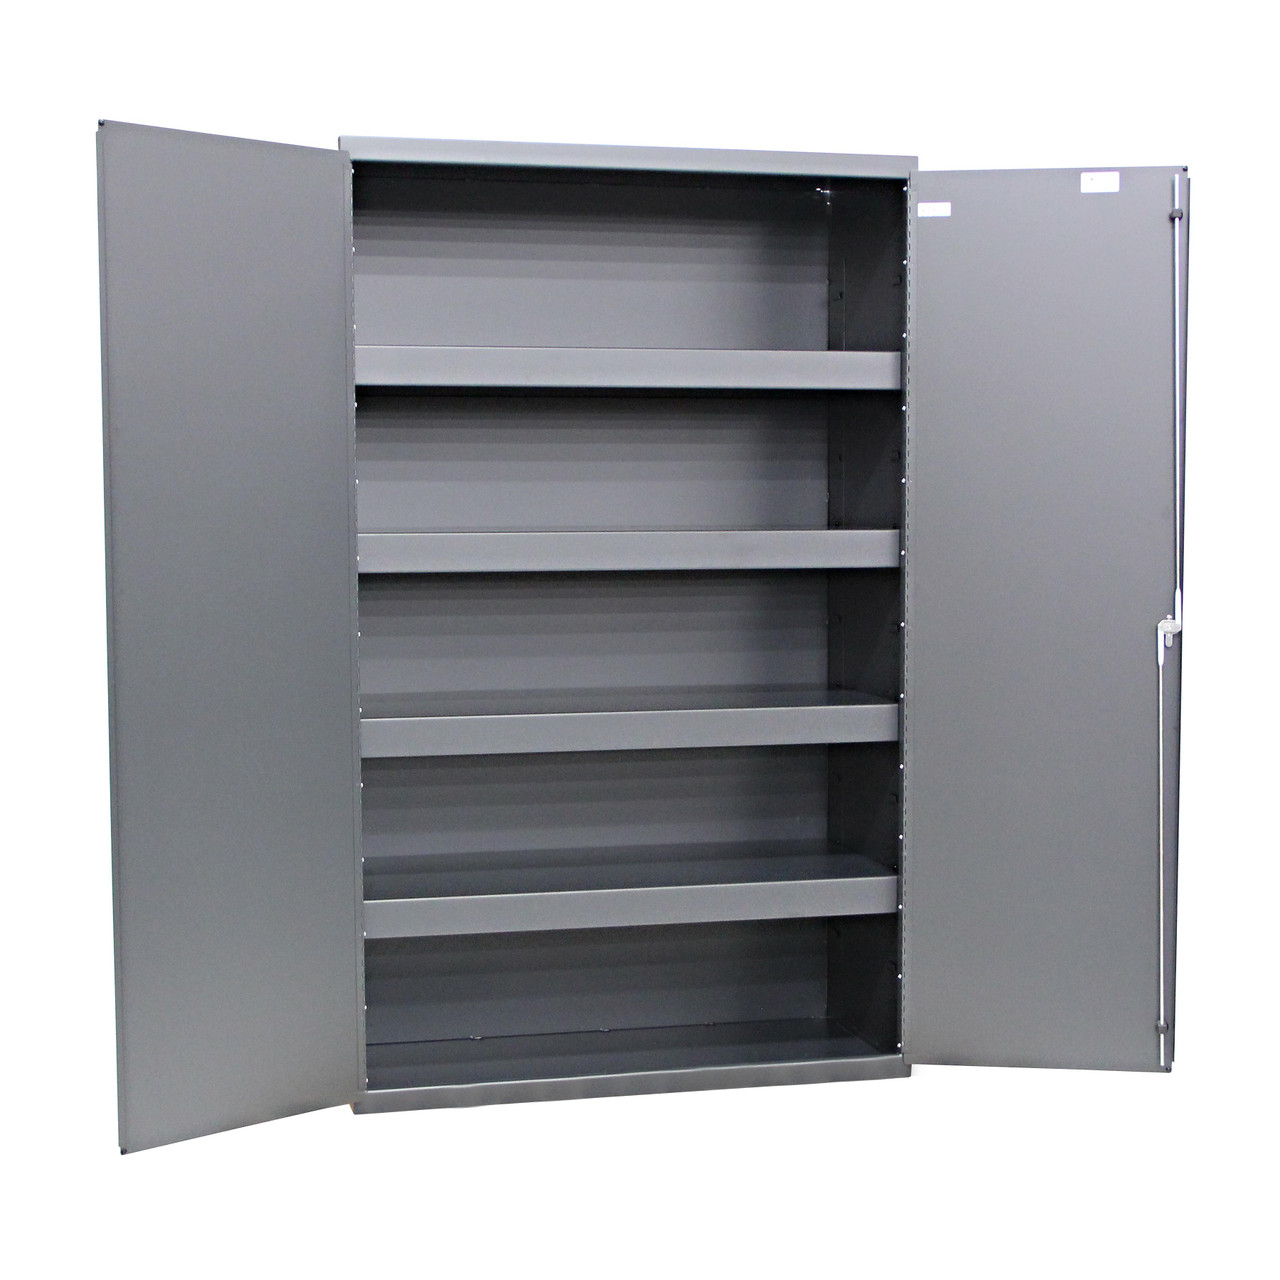 Valley Craft Heavy Duty Steel Cabinet 36 x 18 x 60", Smoke Gray (CALL FOR BEST PRICING)